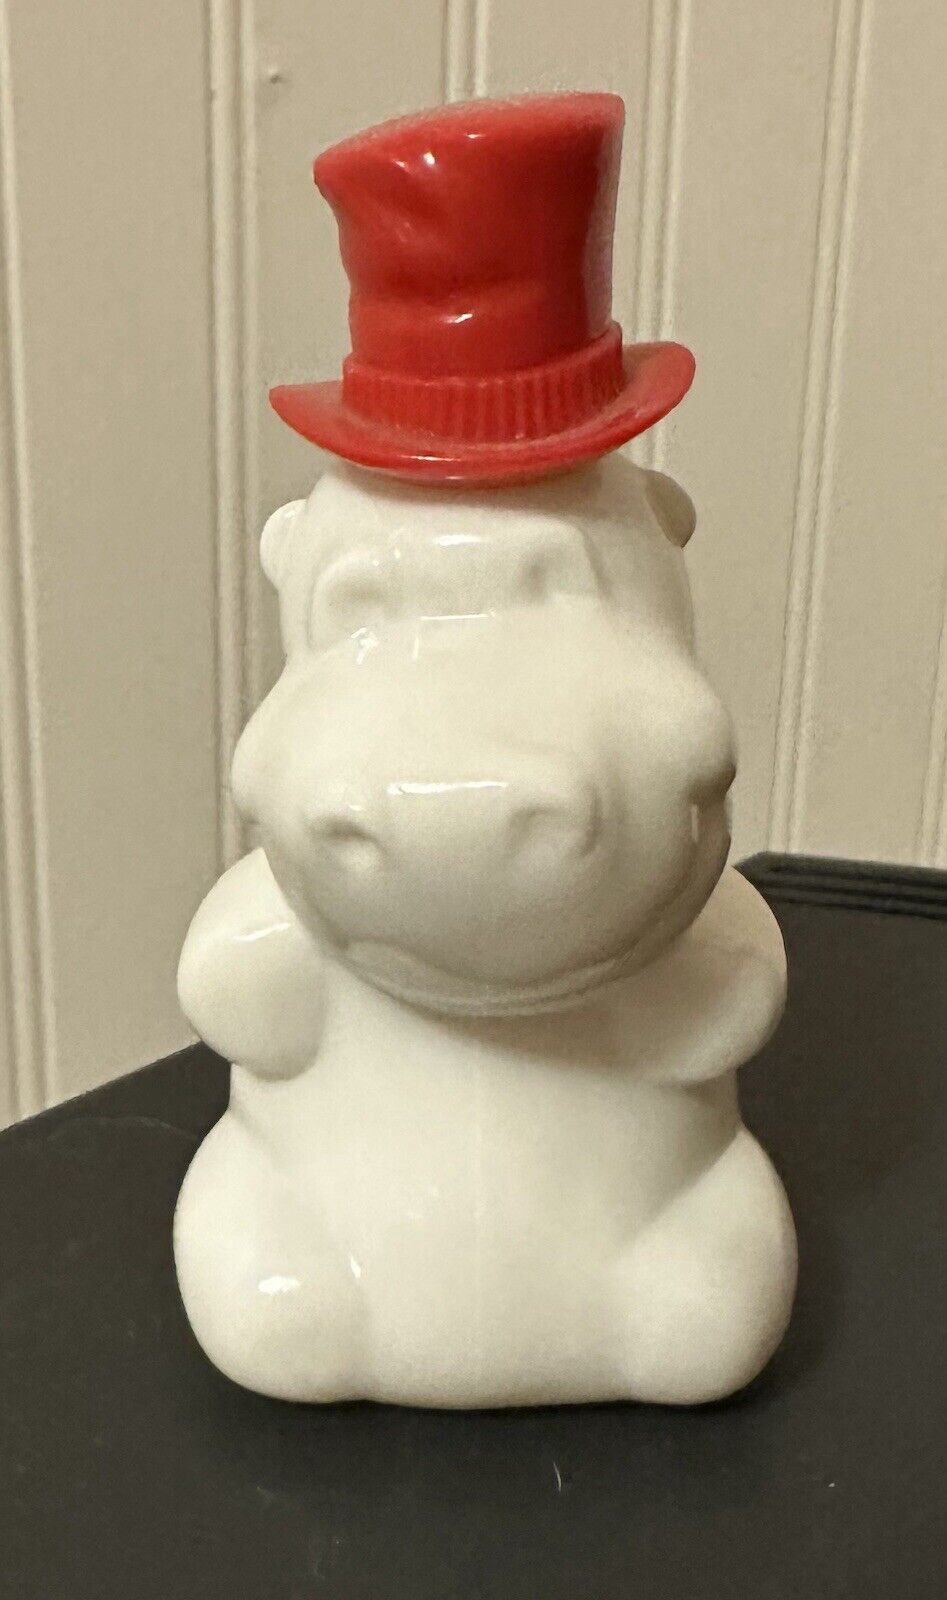 House Hippo Vintage Avon 4 Inches Tall With His Jaunty Top Hat